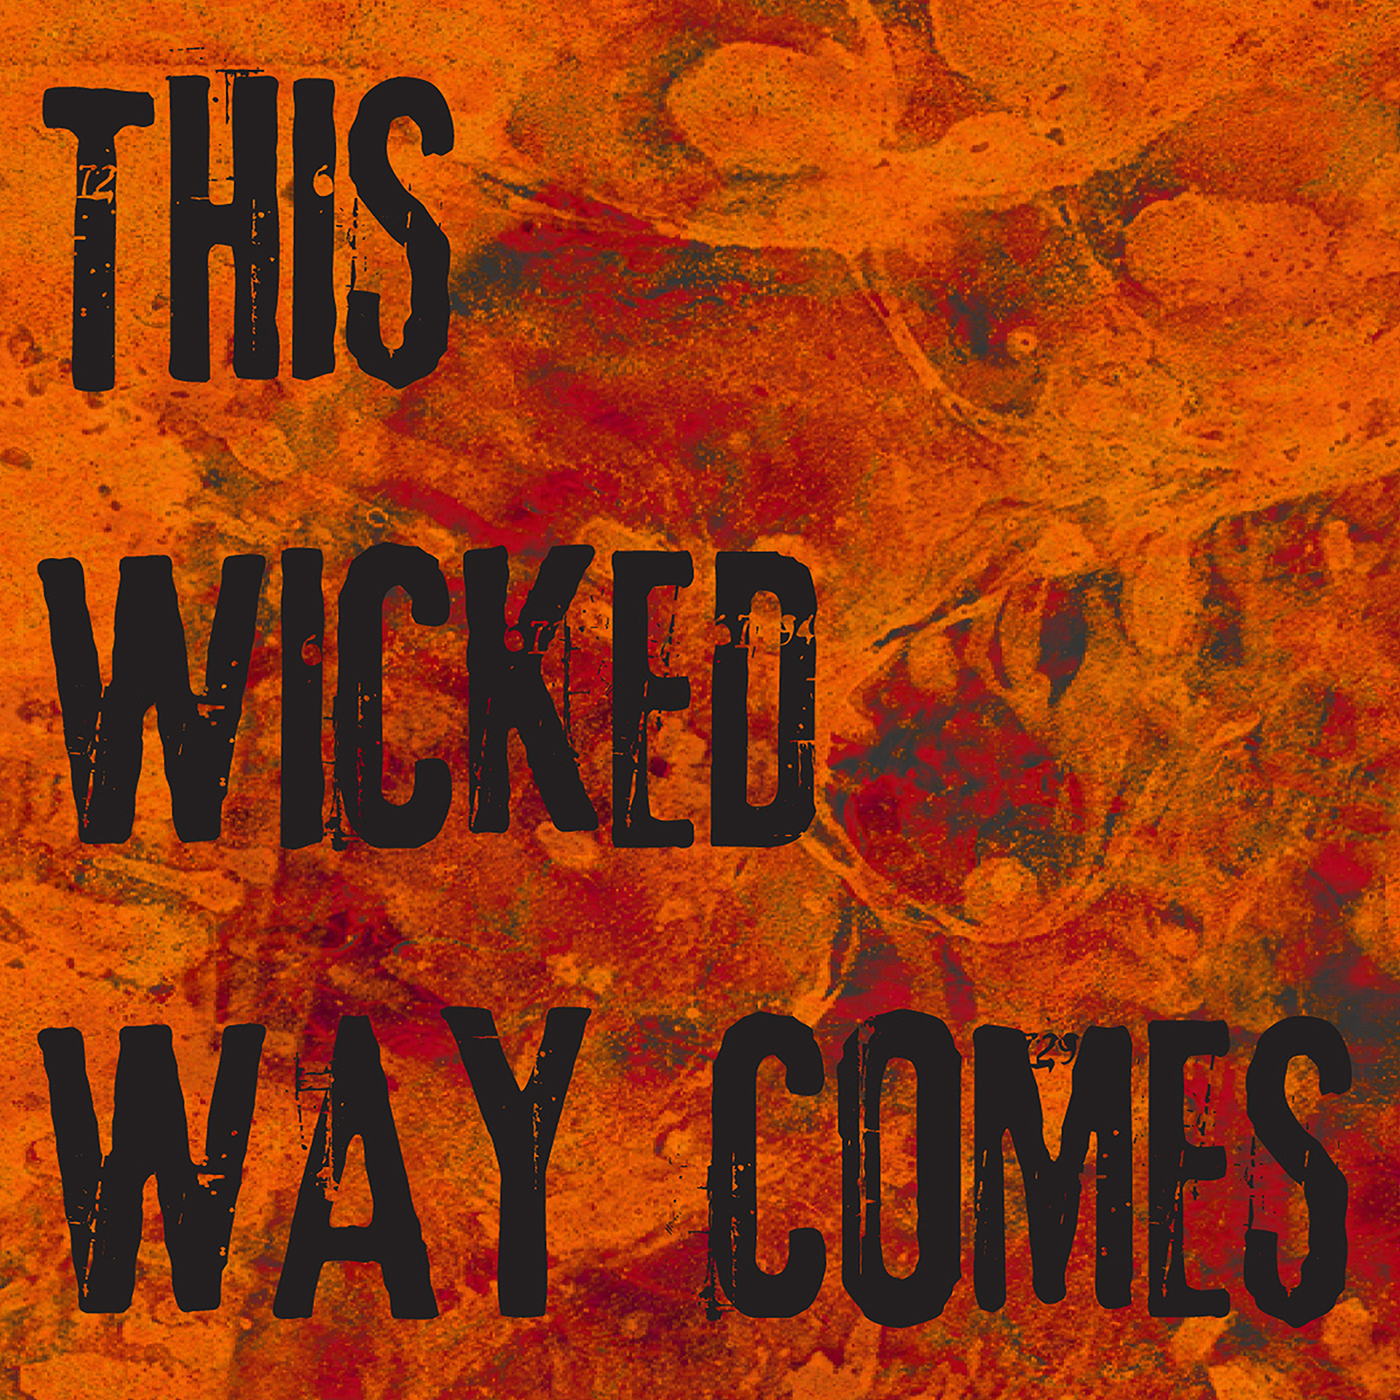 This Wicked Way Comes - Episode 8: Only Ever Alone Together